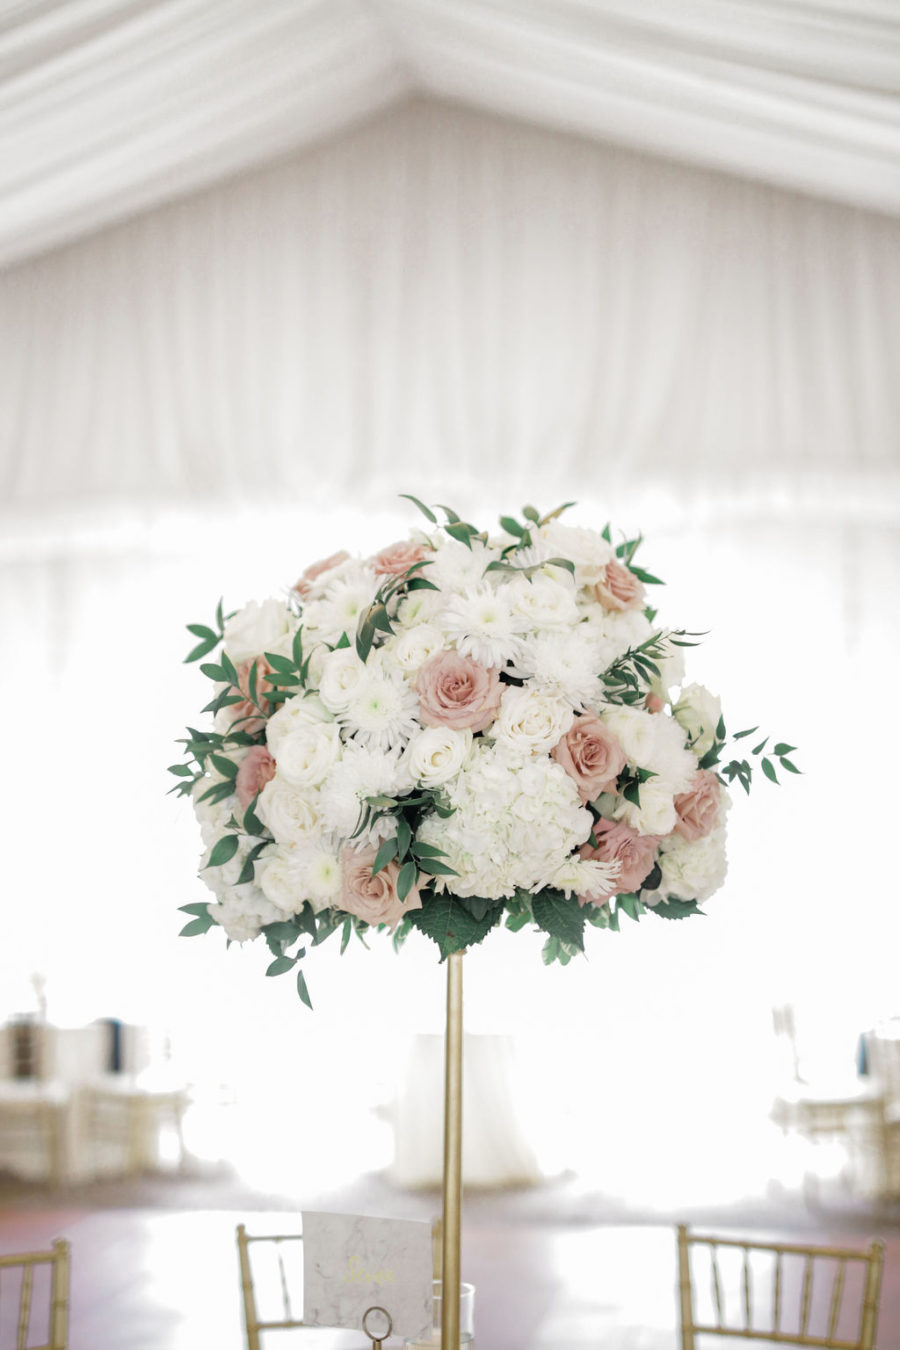 Tall pink and white wedding centerpieces: Wedding portrait by Nashville wedding photographer Maria Gloer Photography